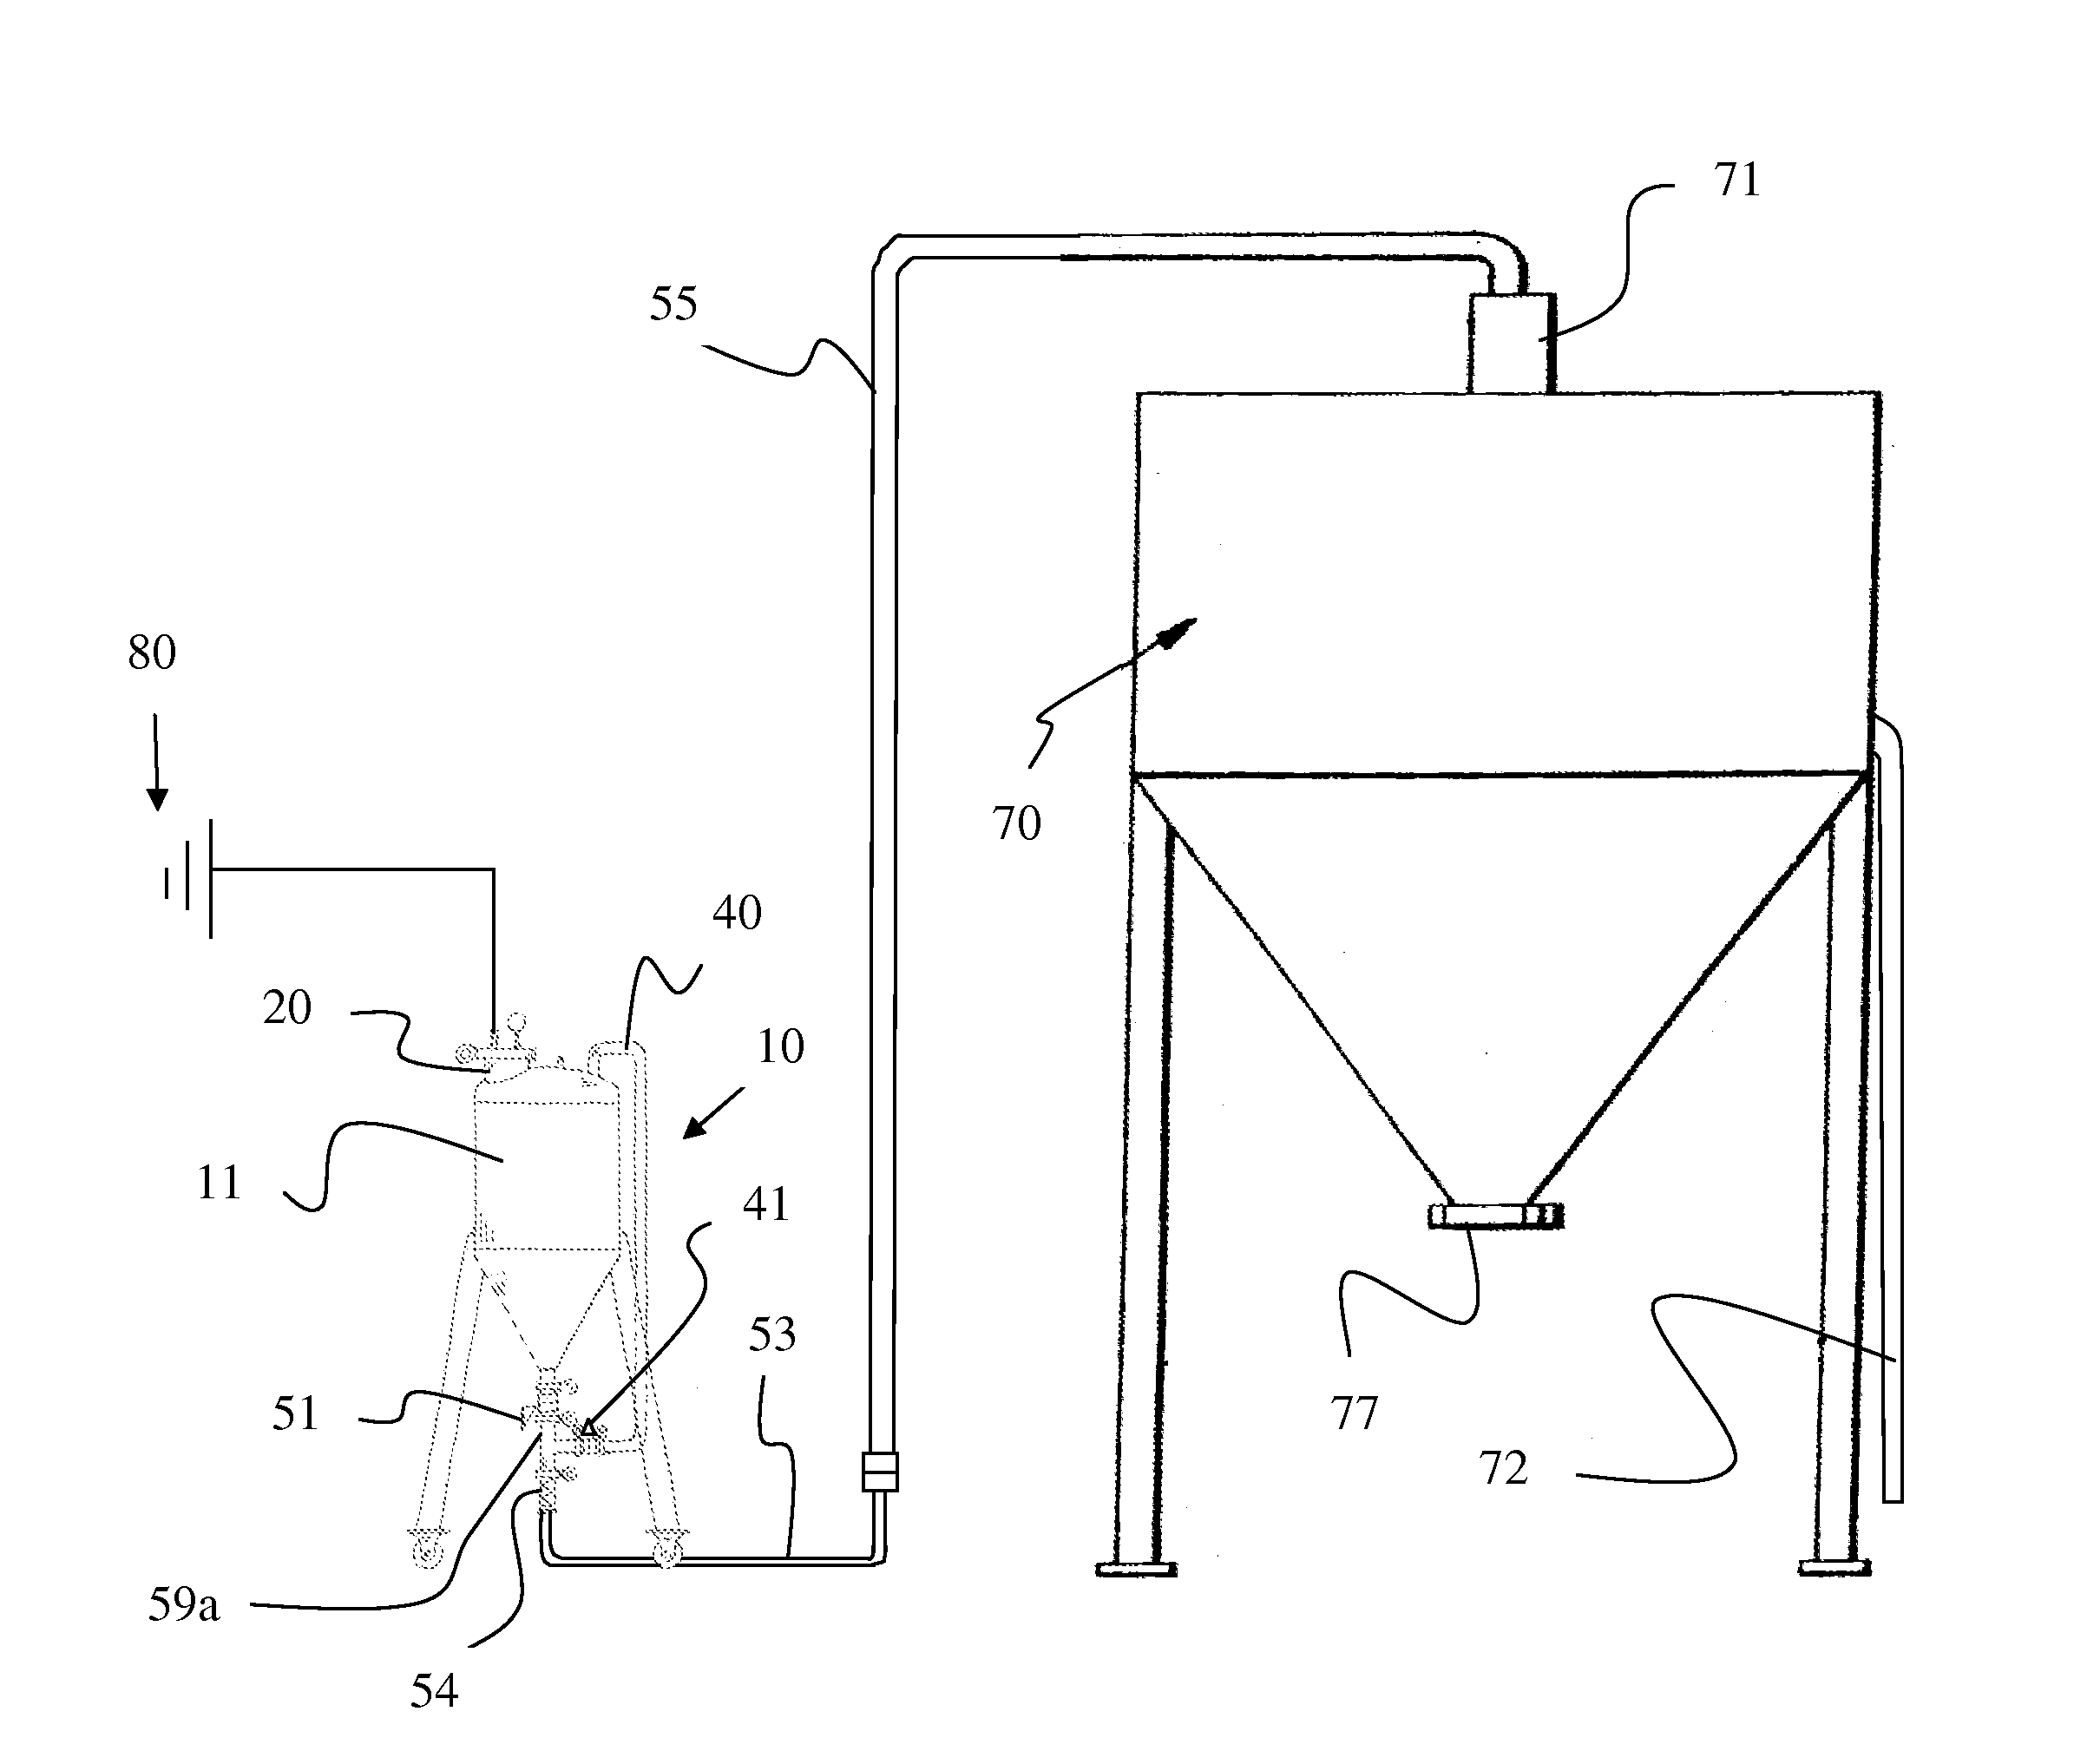 Apparatus, system and method for adding hops or other ingredients to beverage